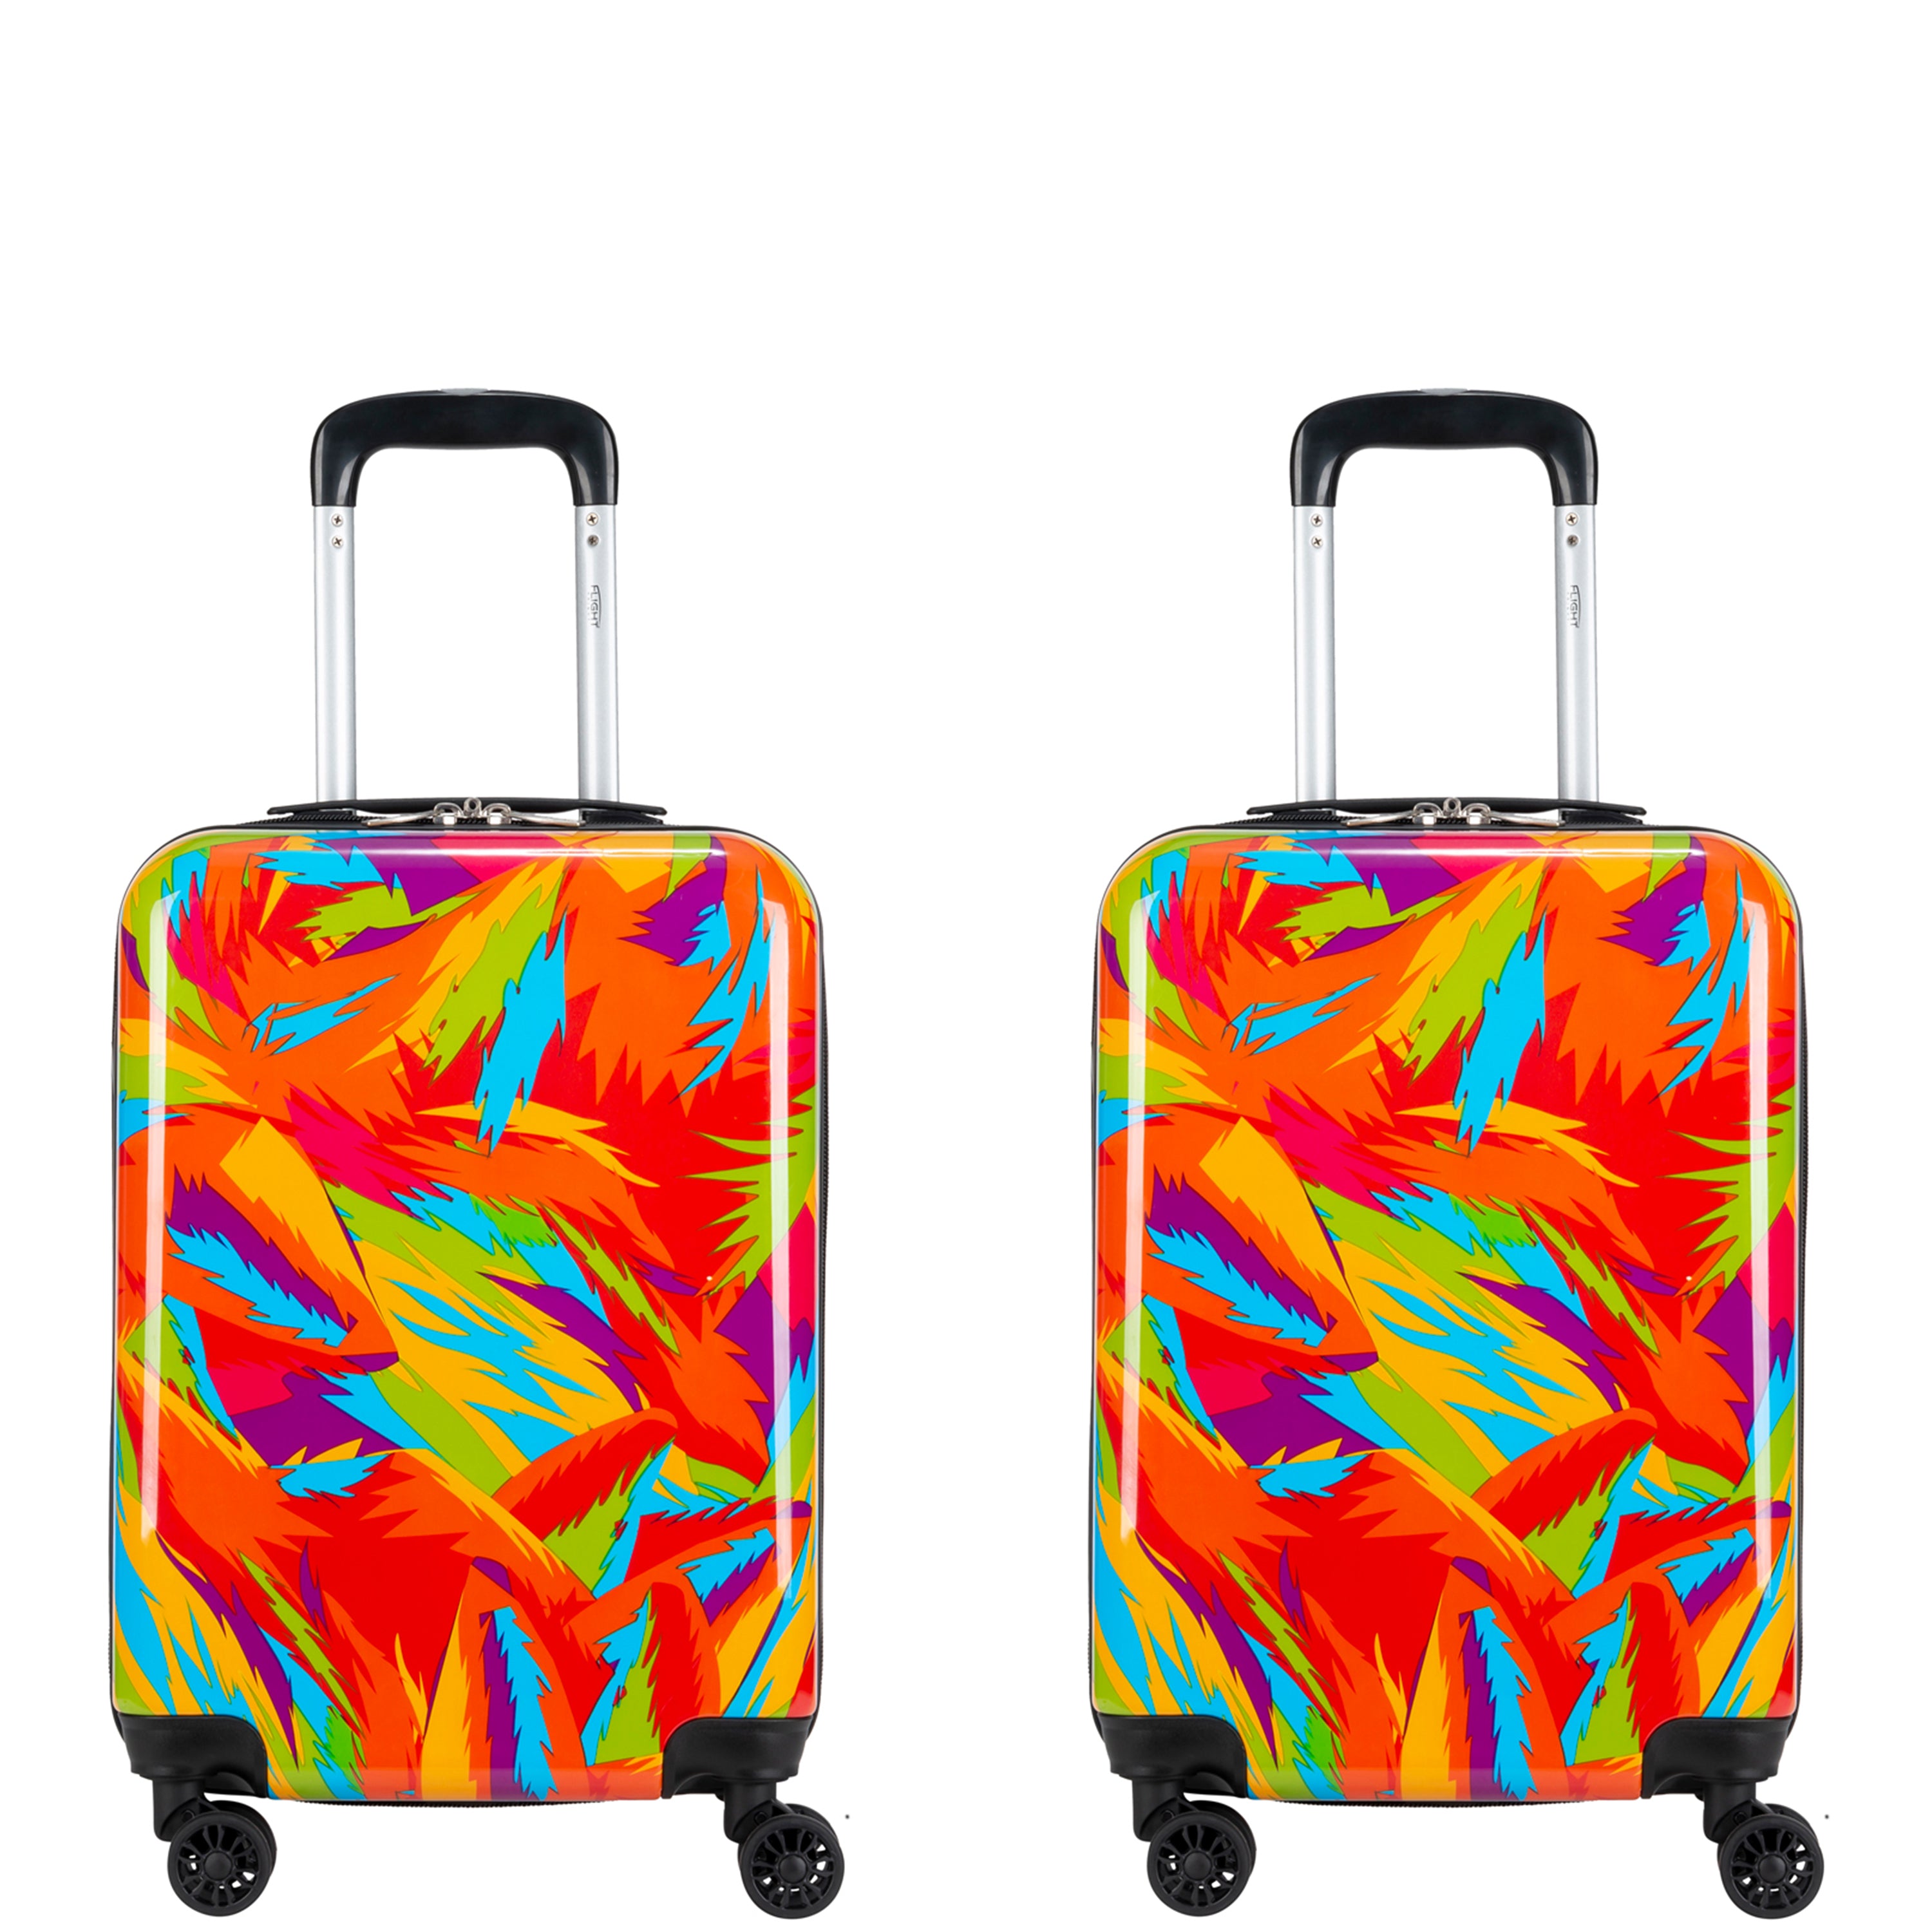 8 Wheel Printed Carry On Cabin Suitcases & Hold Luggage Ryanair BA TUI Approved